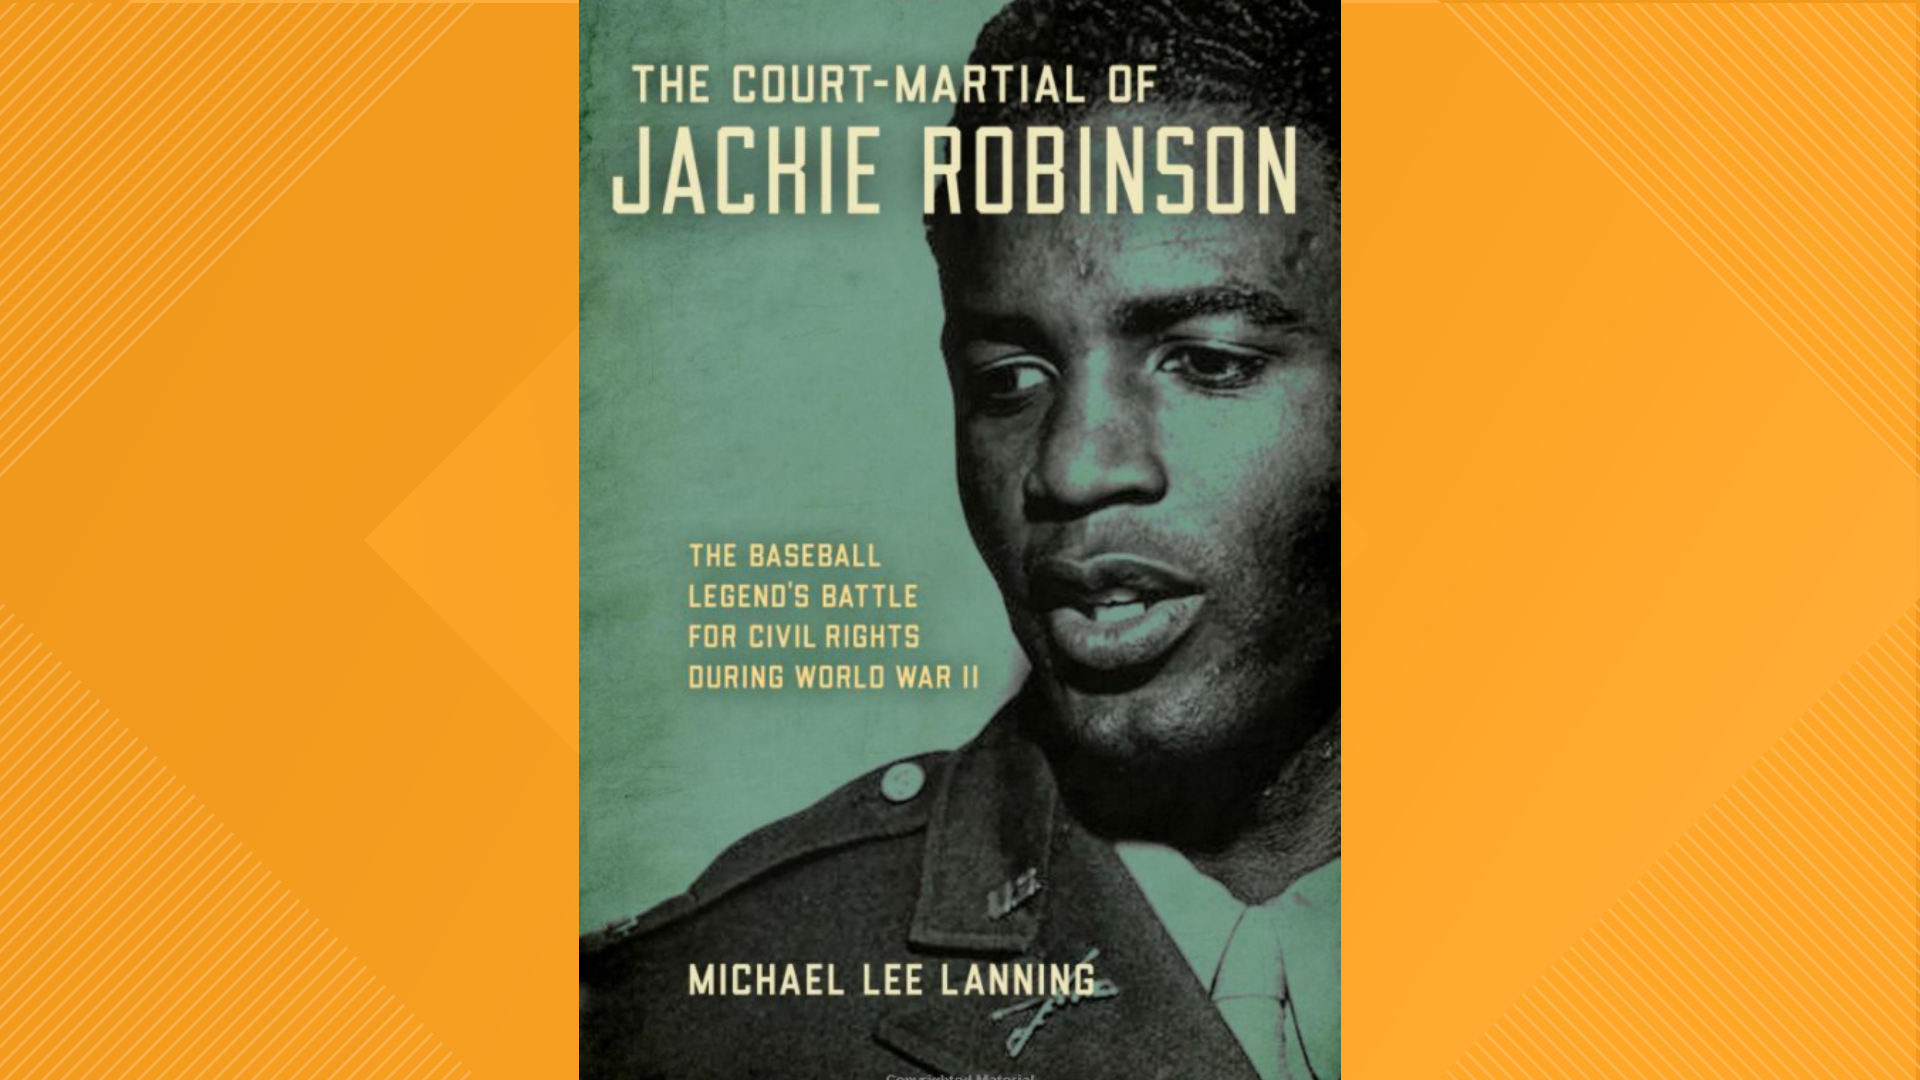 Did you know that Jackie Robinson was Court Martialed on Camp Hood one week after the D-Day invasion?